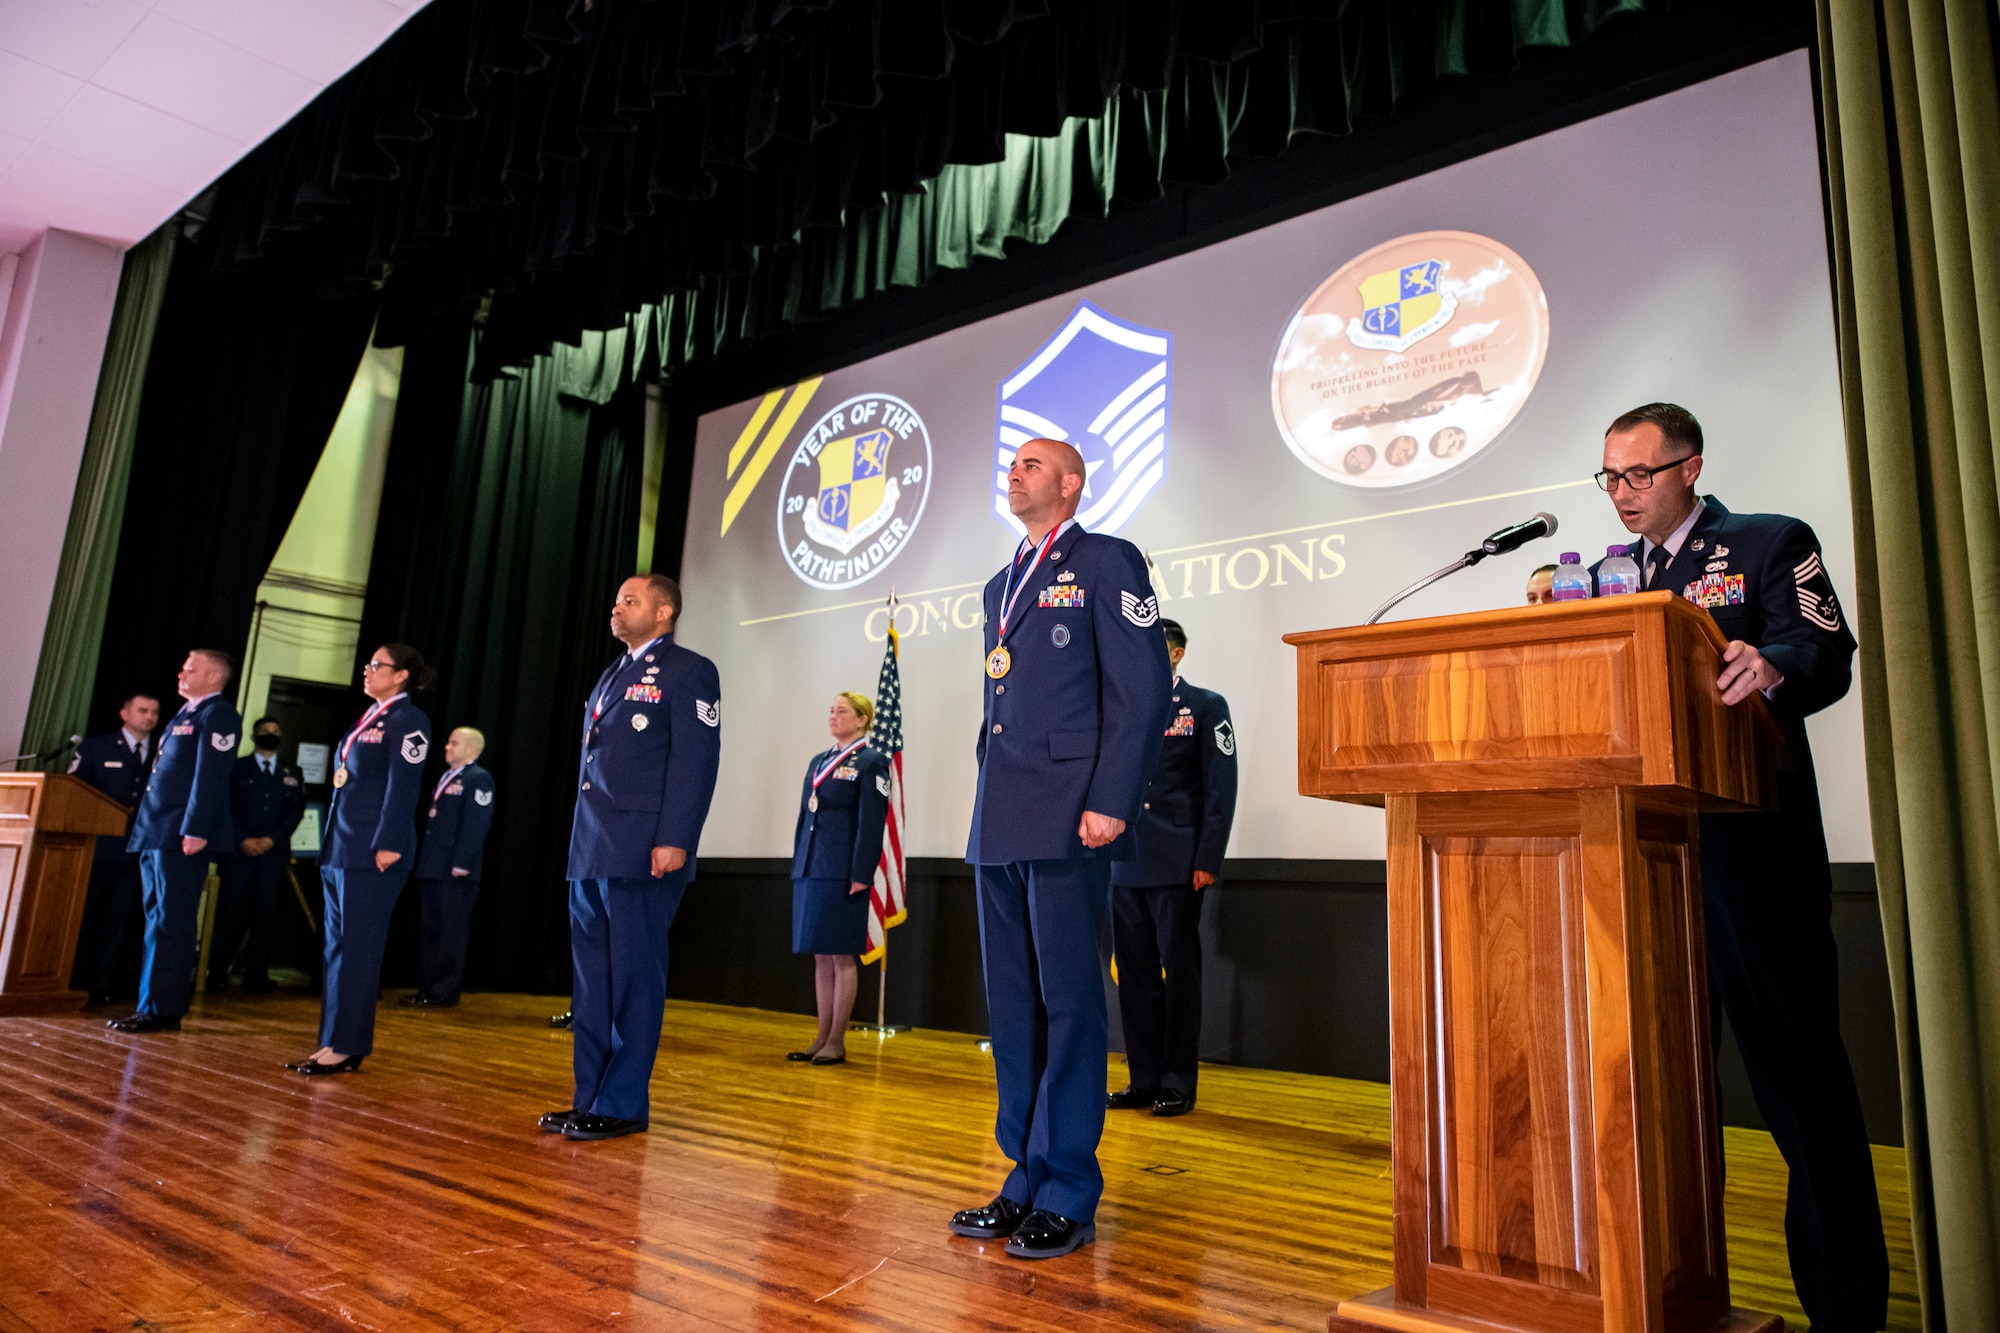 Chief Master Sgt. Kevin Miner, right, 422d Communications Squadron superintendent, speaks during a Senior noncommissioned officer induction ceremony at RAF Alconbury, England, Aug. 14, 2020. The event honored and celebrated the Airmen who have earned the rank of Master Sgt. (U.S. Air Force photo by Senior Airman Eugene Oliver)